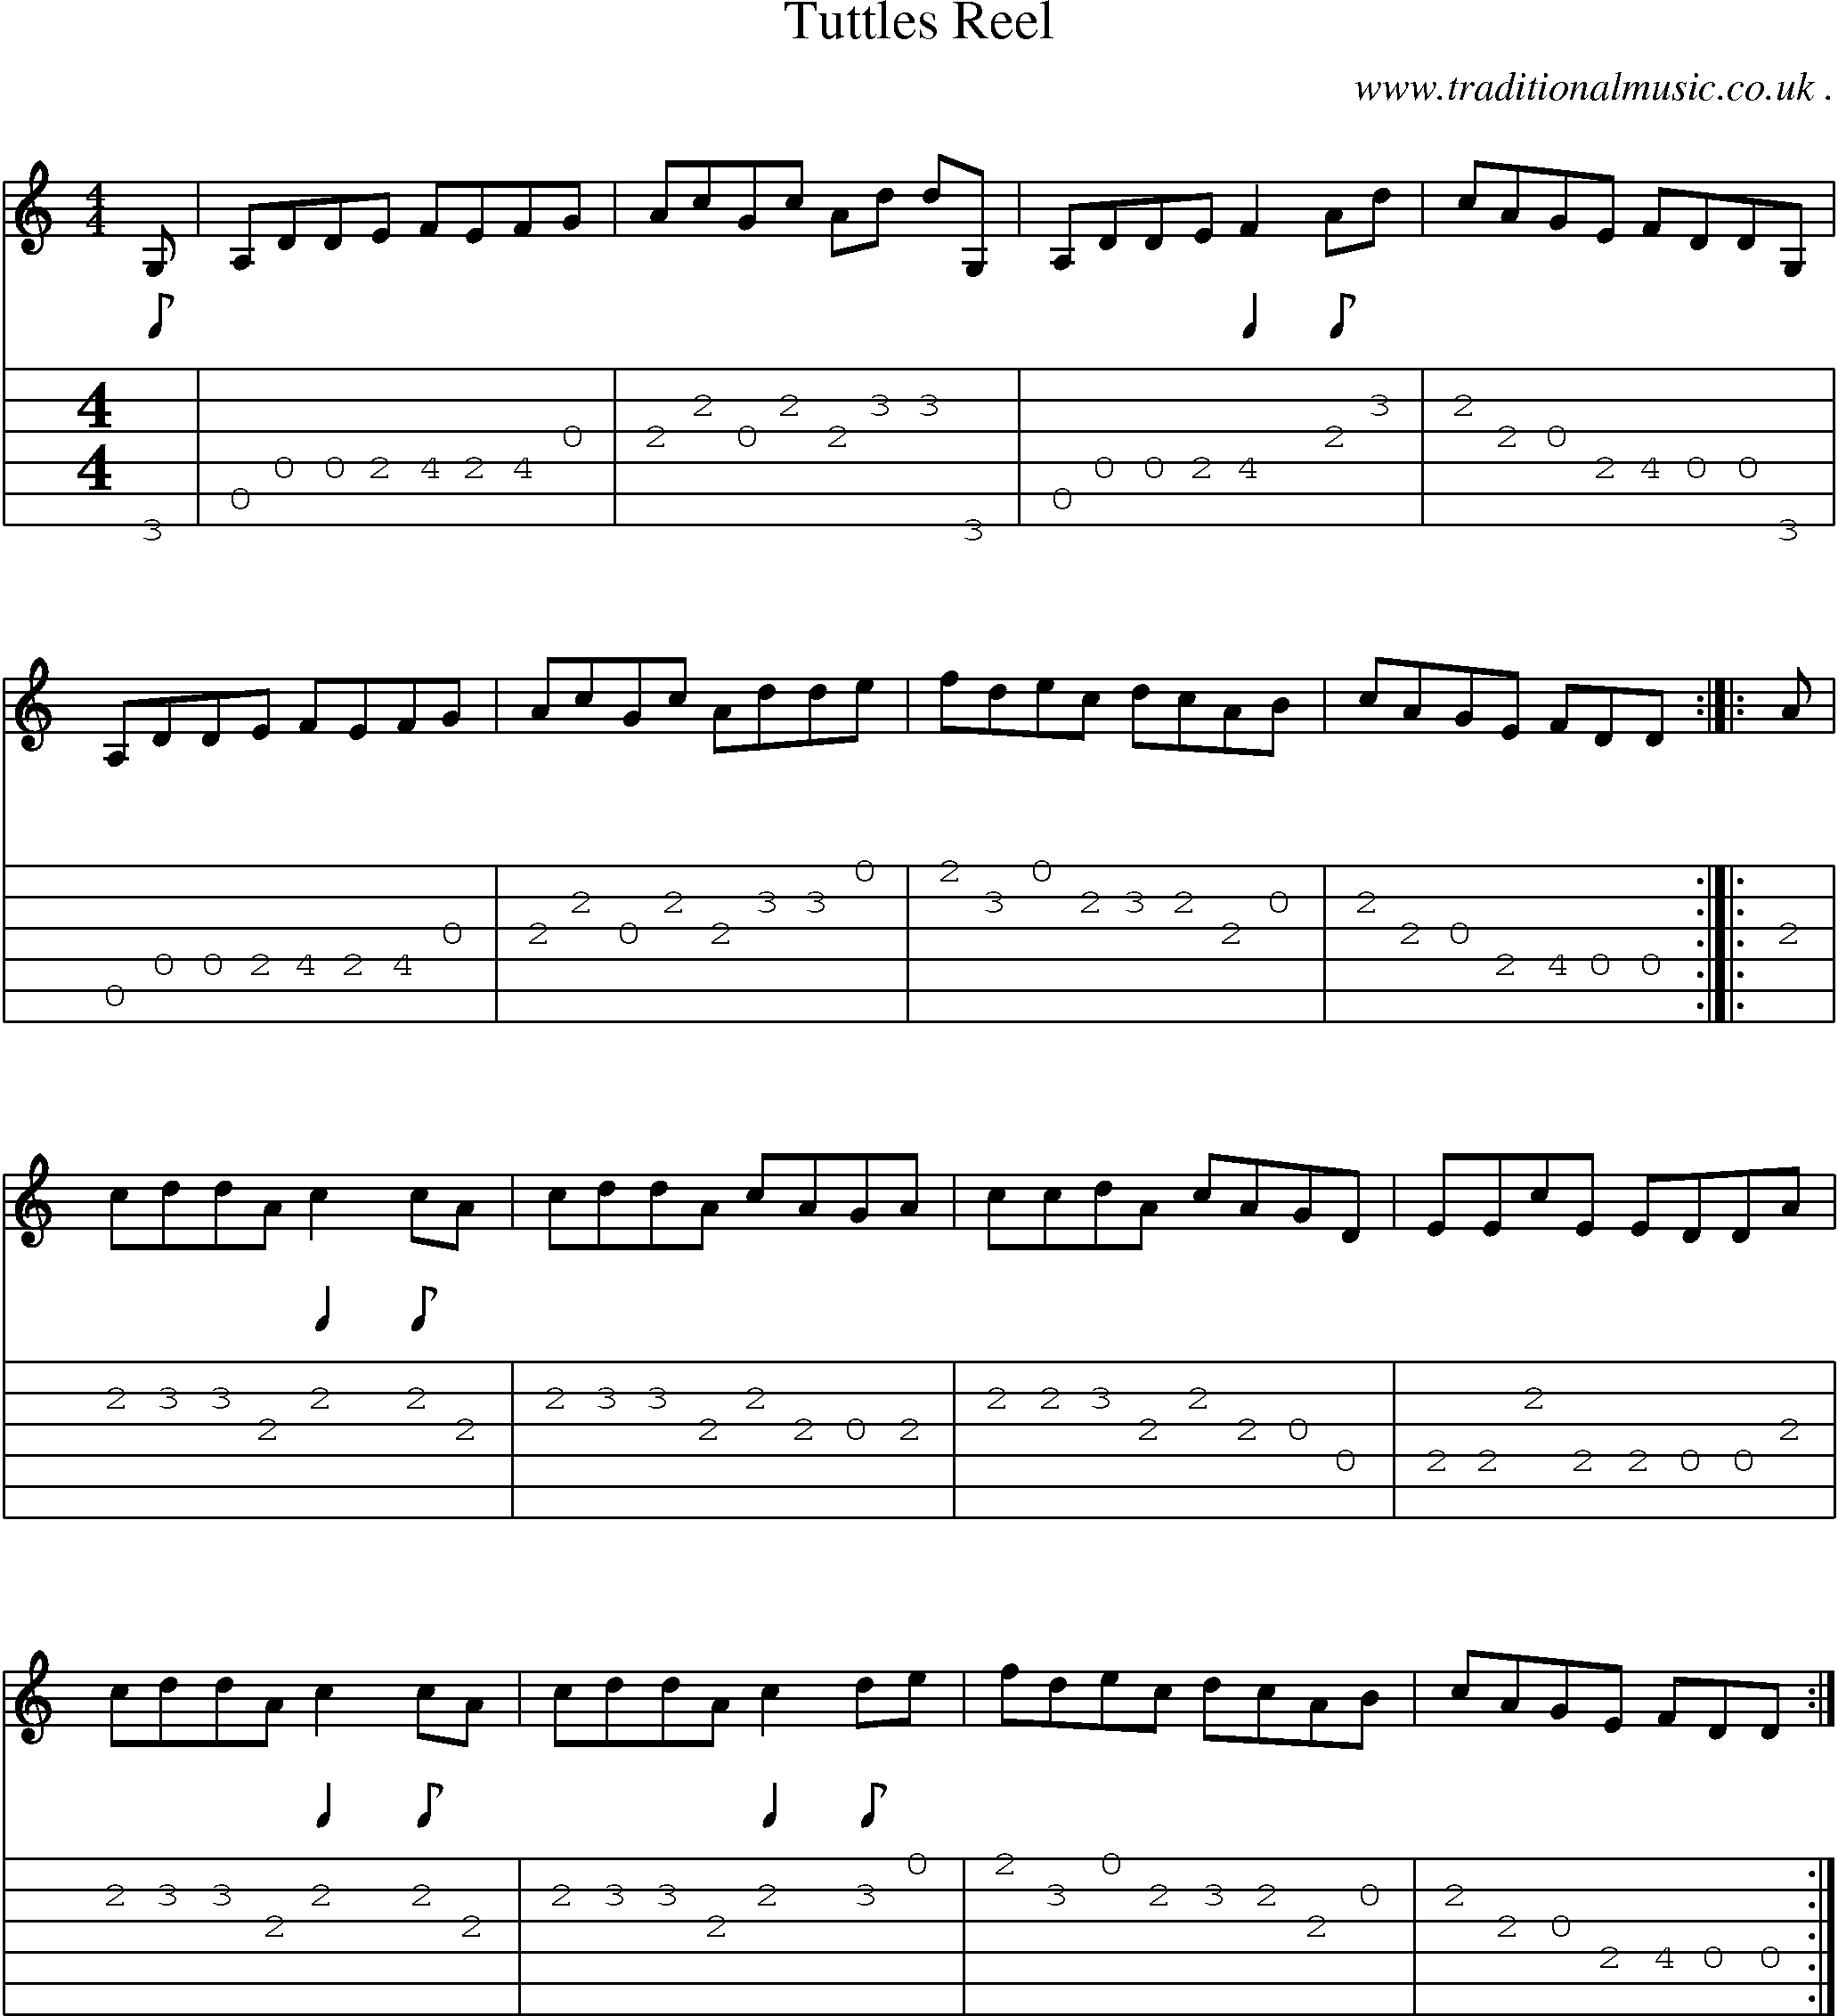 Sheet-Music and Guitar Tabs for Tuttles Reel